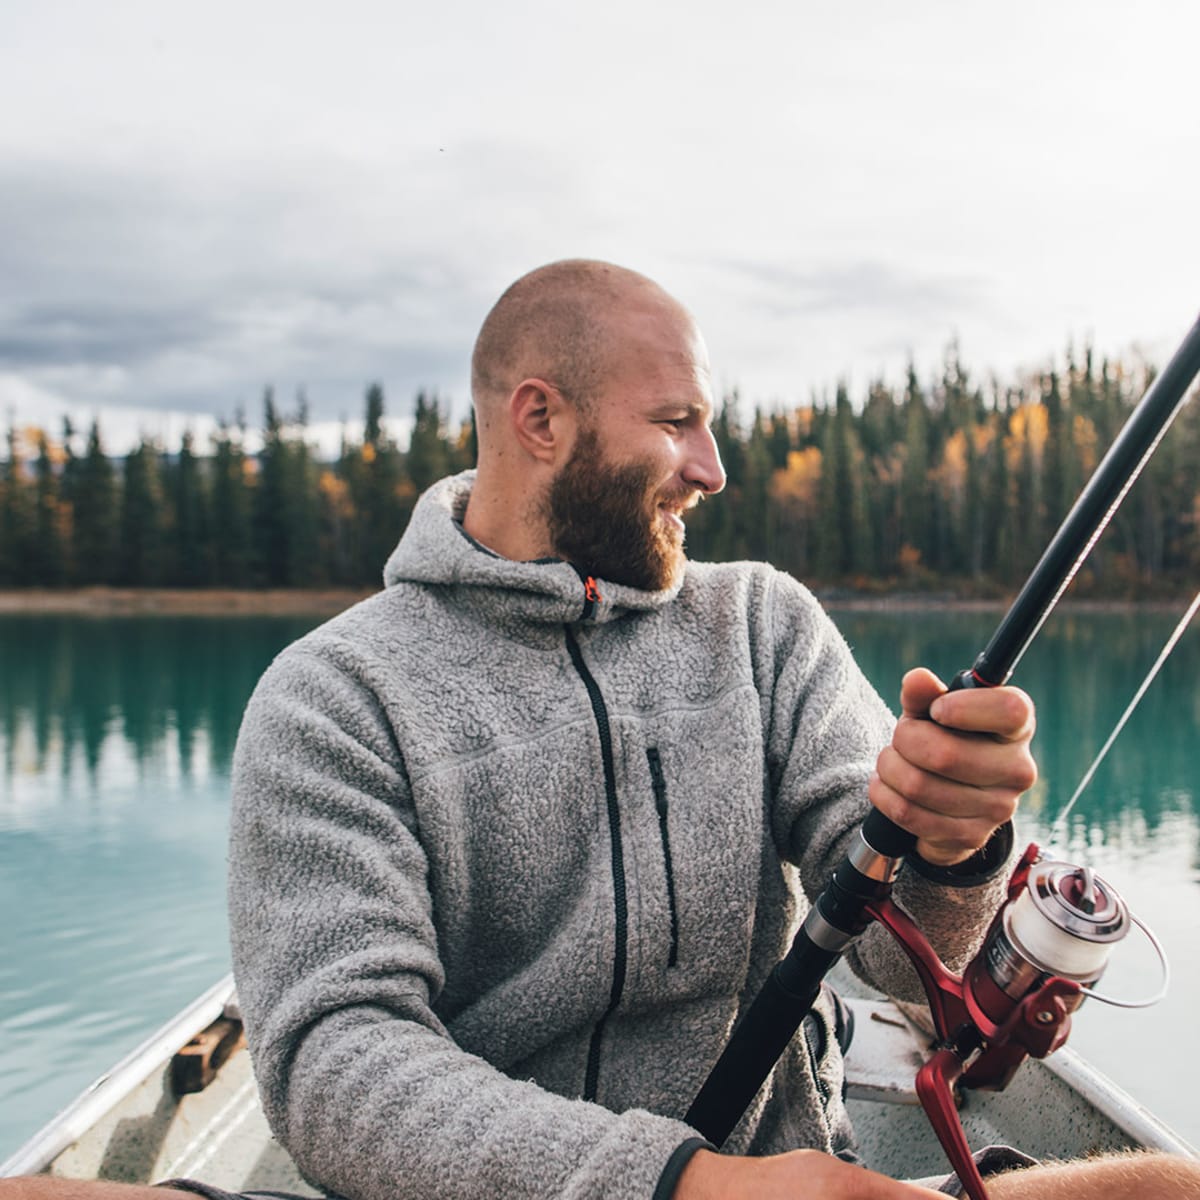 The Best New Fishing Gear of 2019: Rod, Rotor, and More - Men's Journal